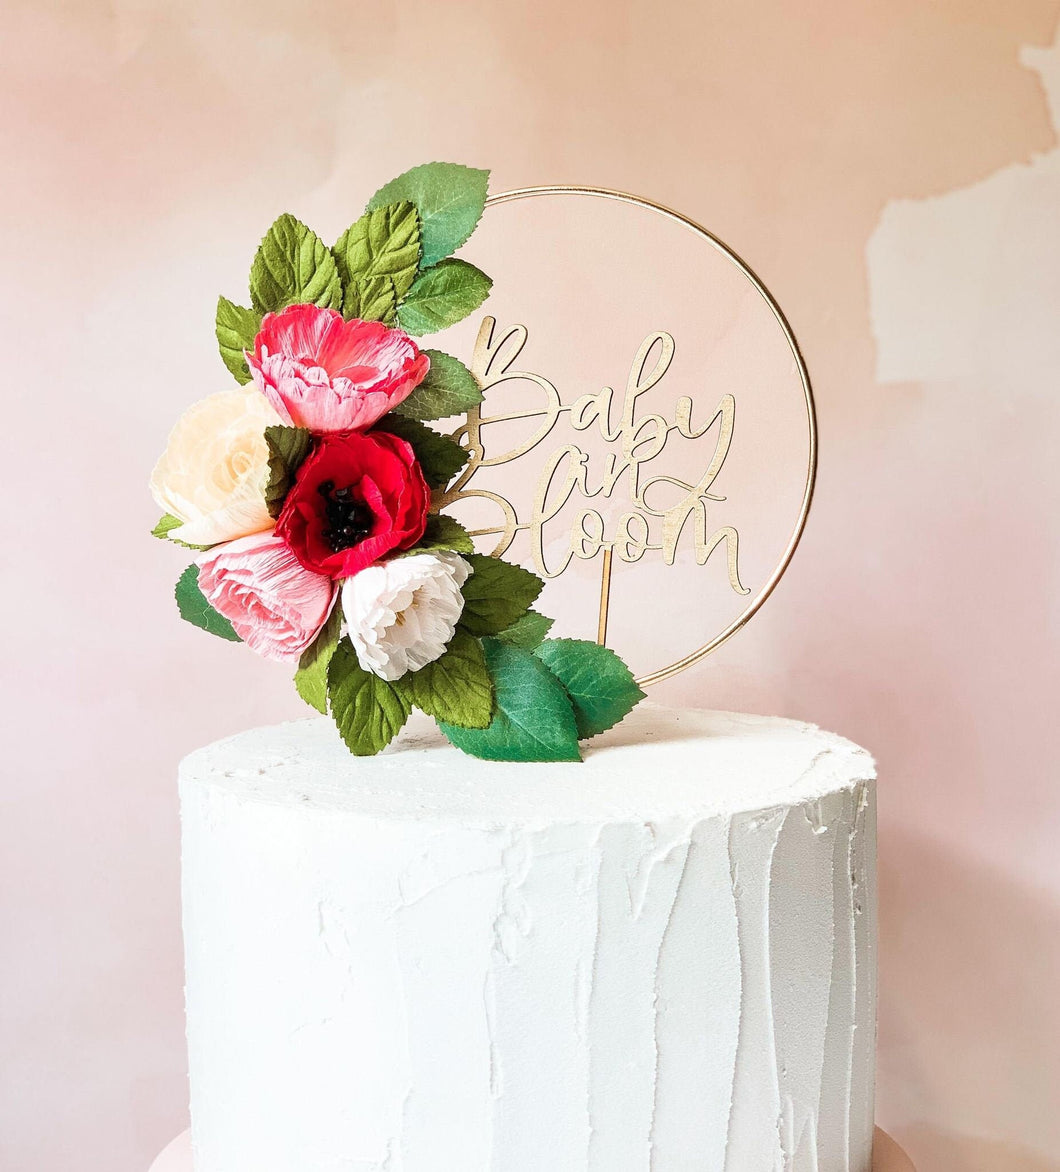 Baby In Bloom Shower - Kate Spade Inspired Cake Topper - Floral Hoop Topper - Bridal Baby Shower - 1st First Birthday - Floral Themed Party